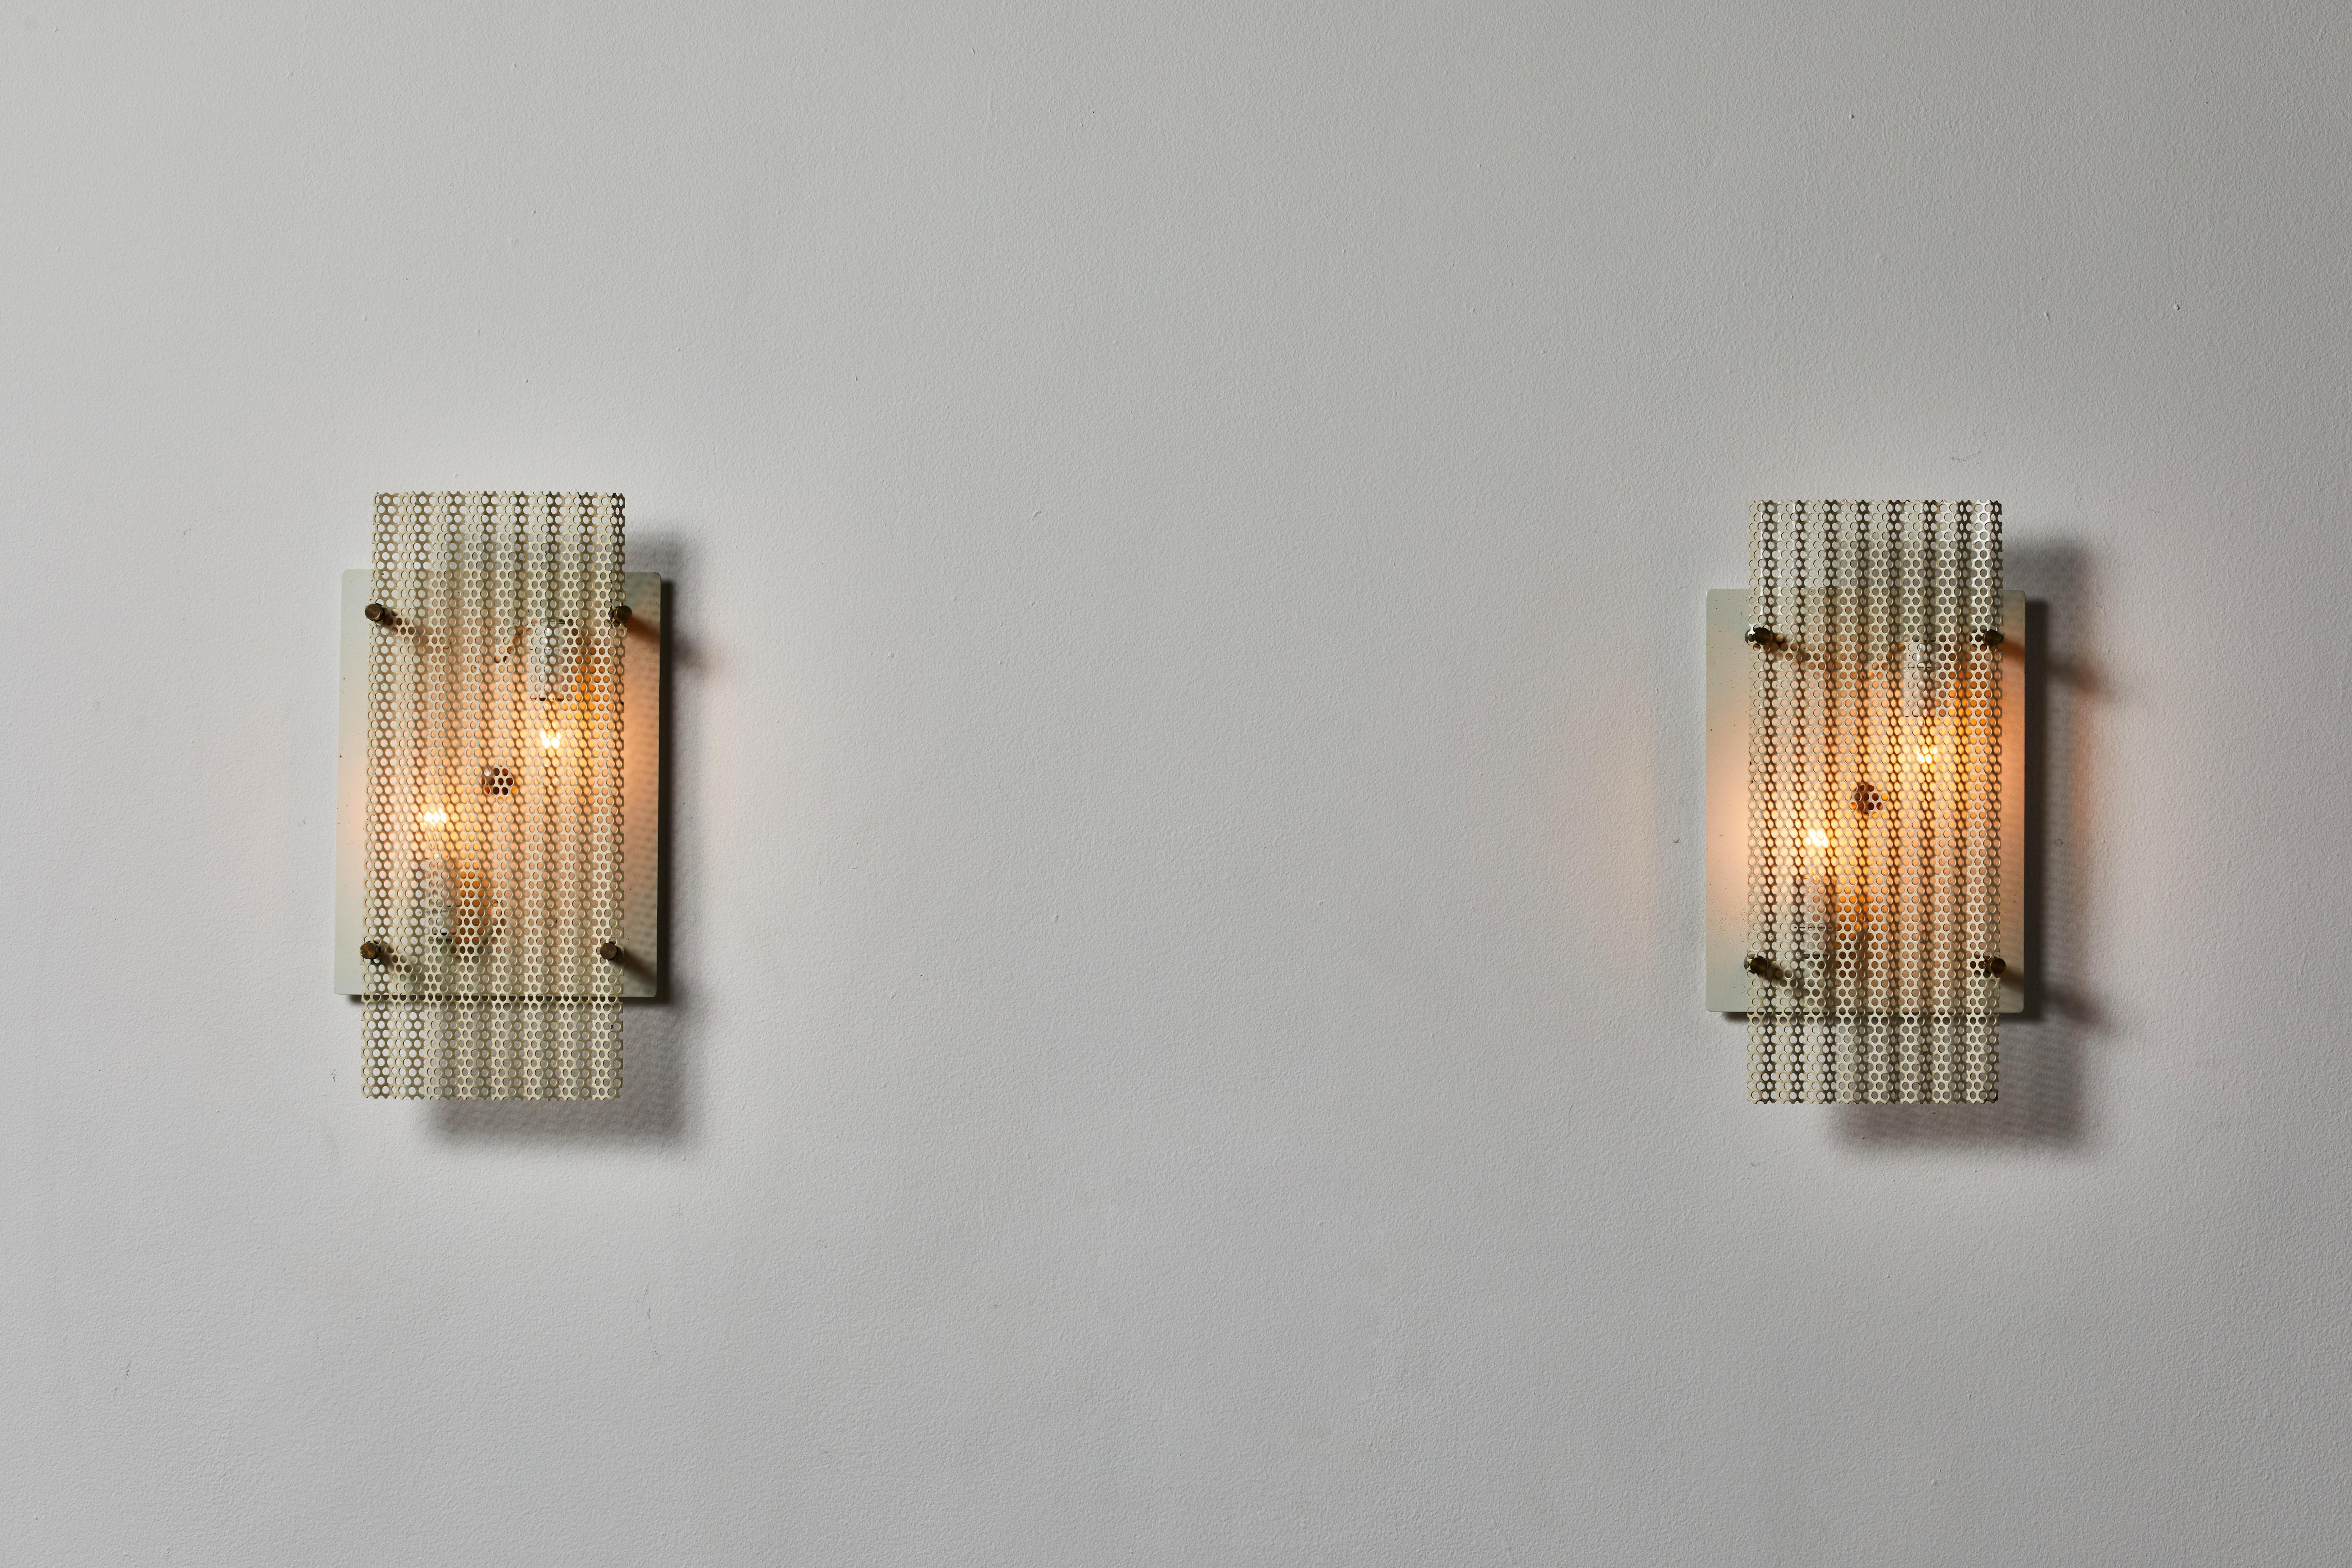 Pair of sconces manufactured in France, circa 1950s. Original painted perforated aluminum, brass. Wired for U.S. standards. We recommend two E14 40w maximum candelabra per fixture. Bulbs provided as a one time courtesy.